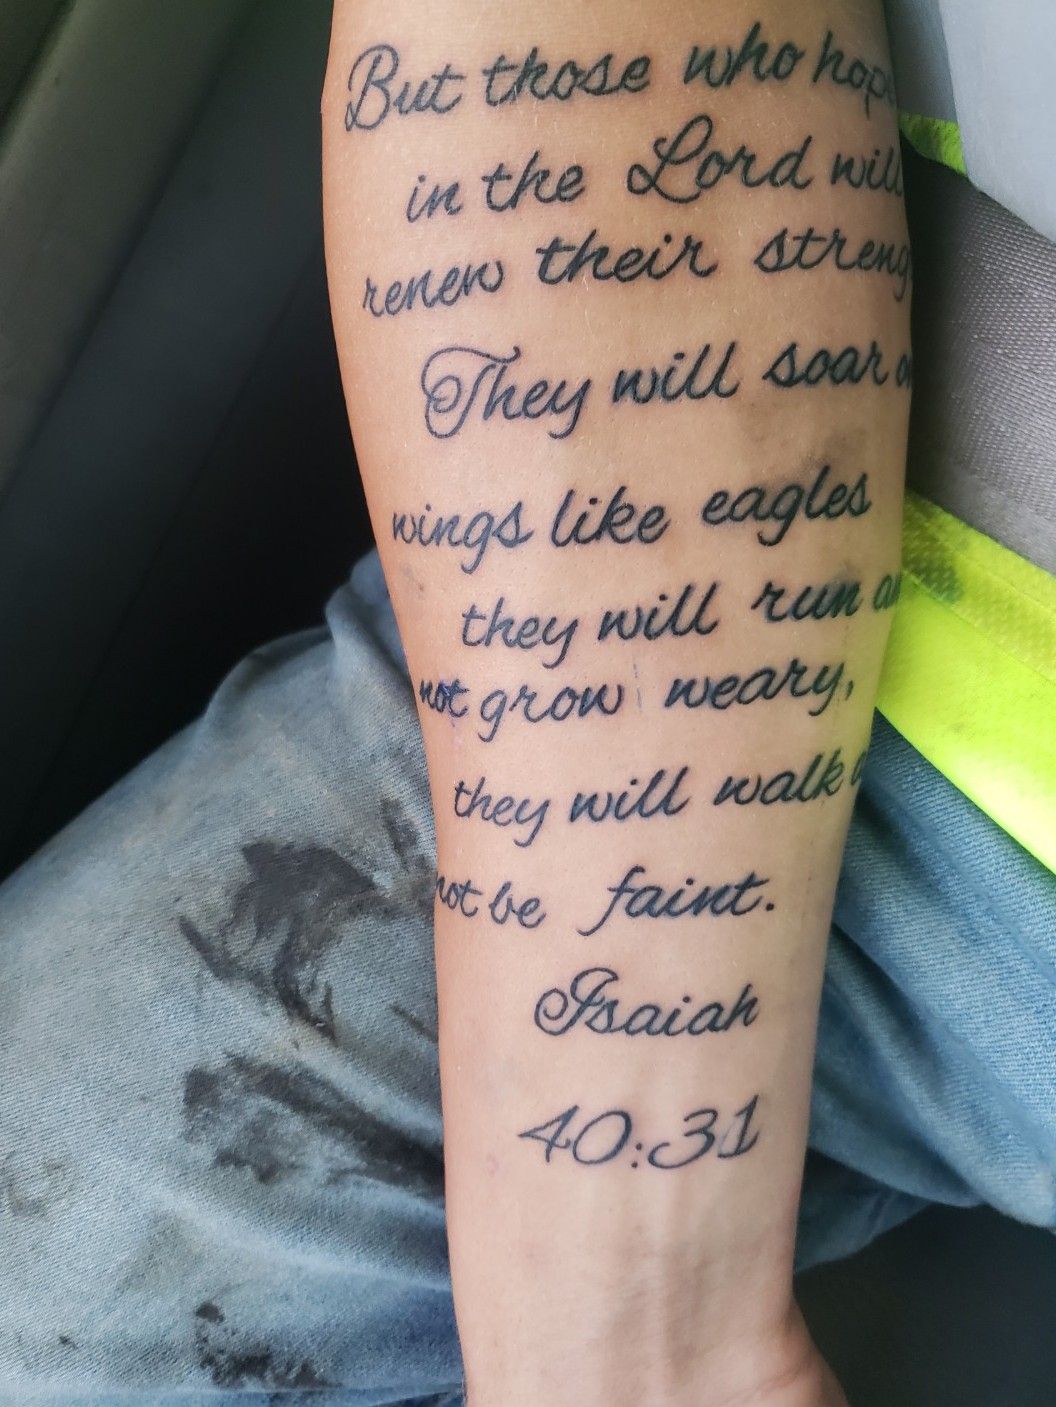 Isaiah 4031 and Eagle Wings Tattoo  Paulo Madeira Tattoo A  Flickr